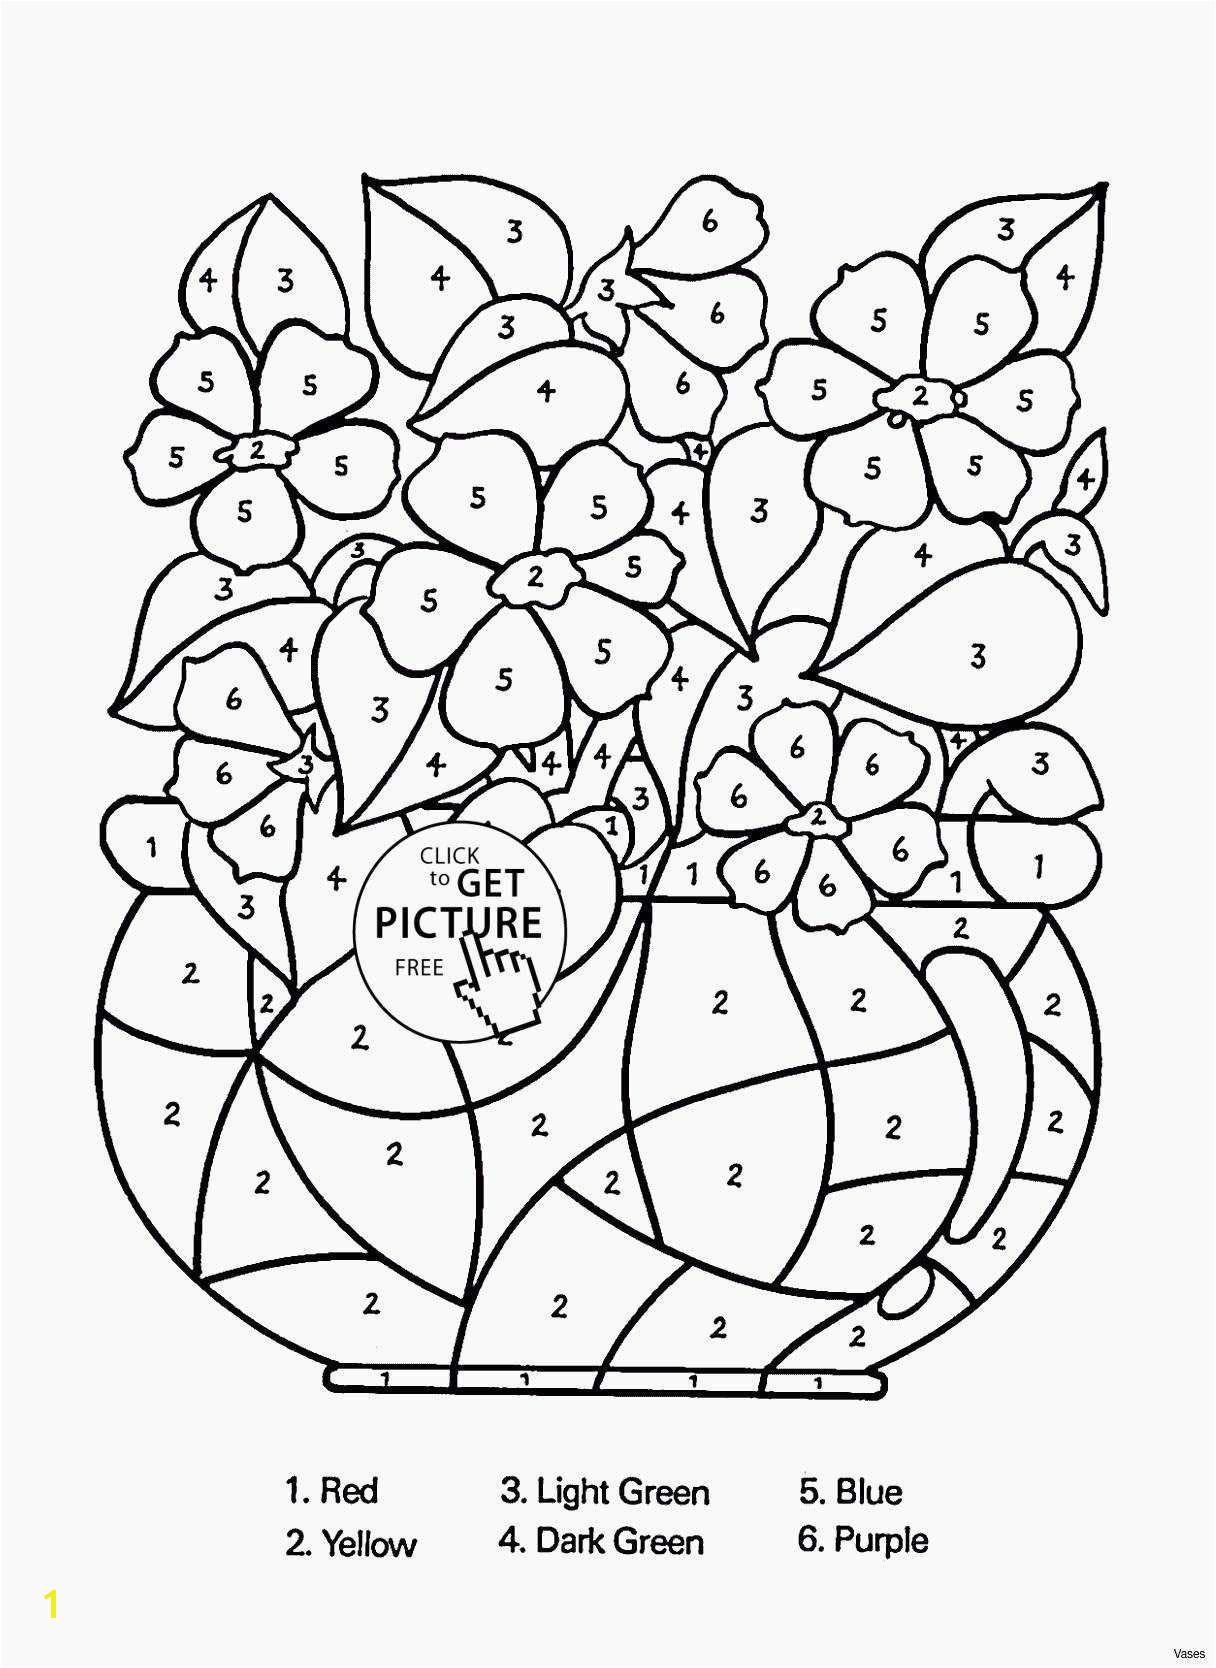 Fid Spinner Coloring Pages to Print 20 Awesome Fid Spinner